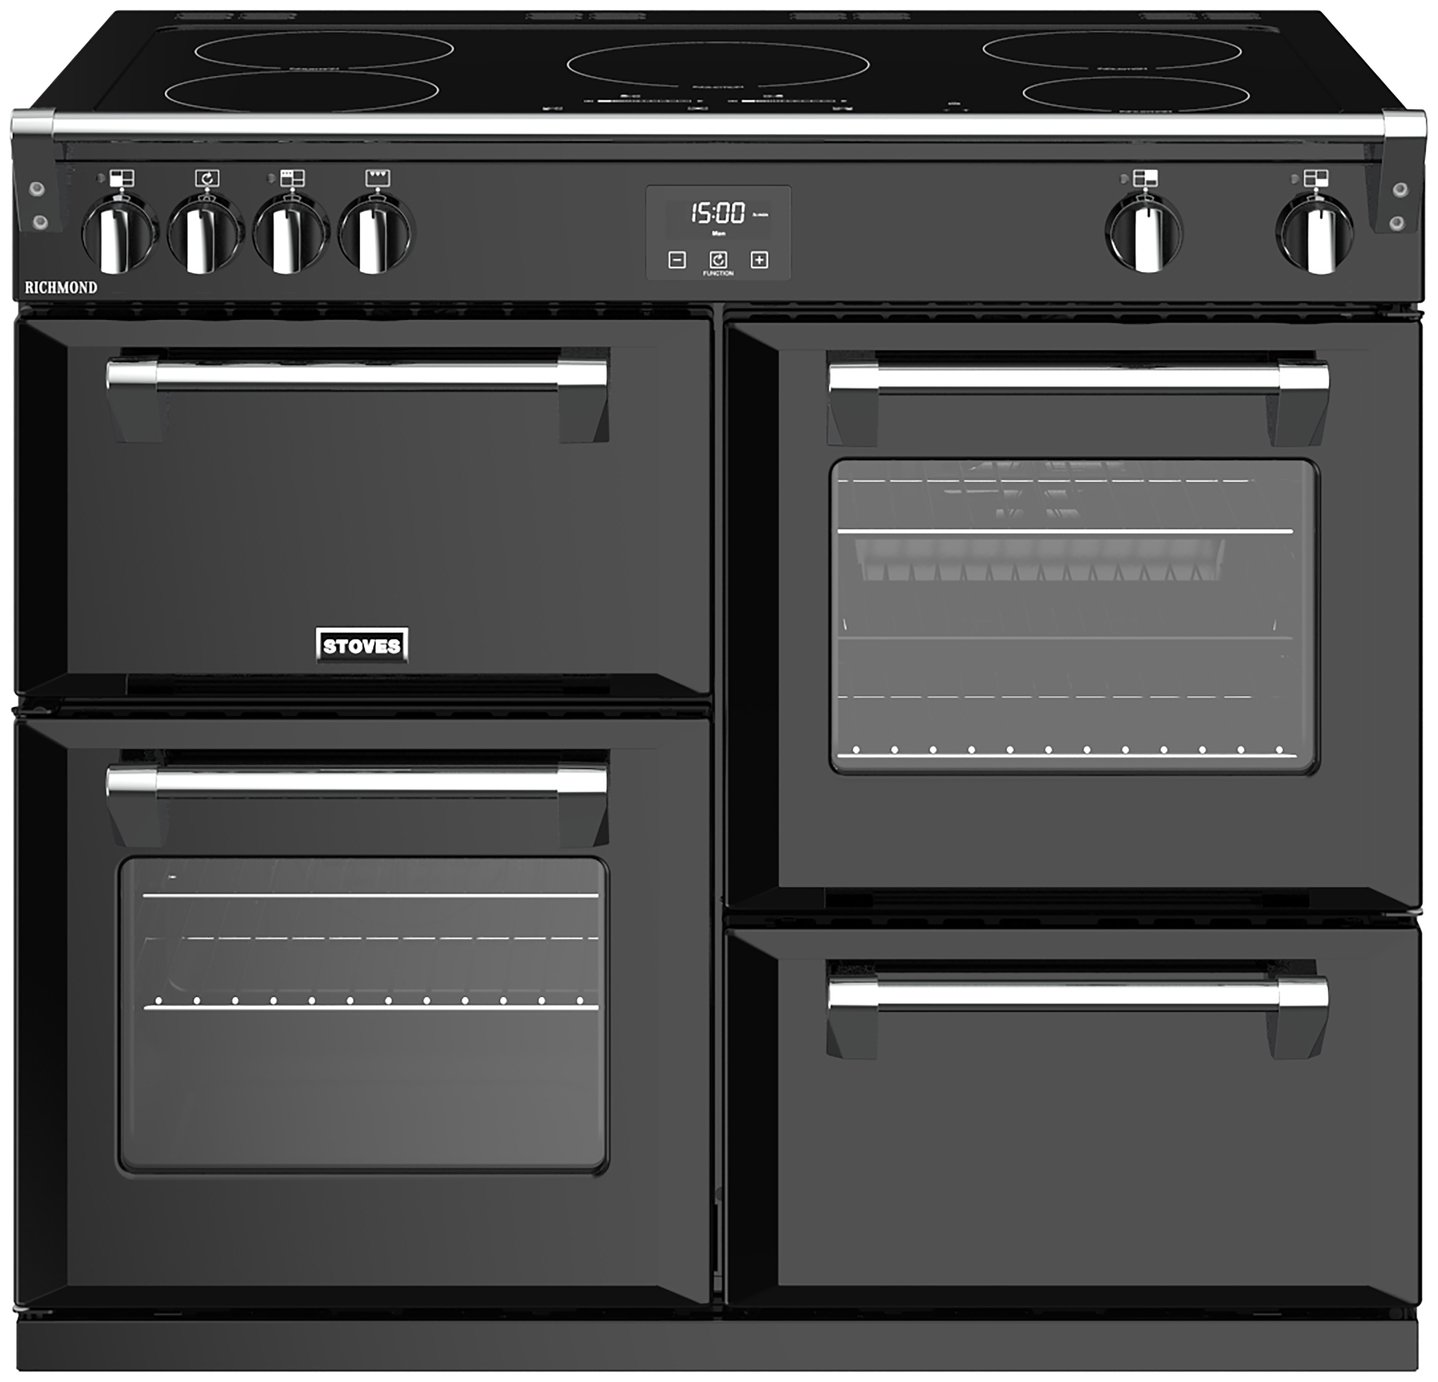 Stoves Richmond S1000EI Electric Range Cooker review